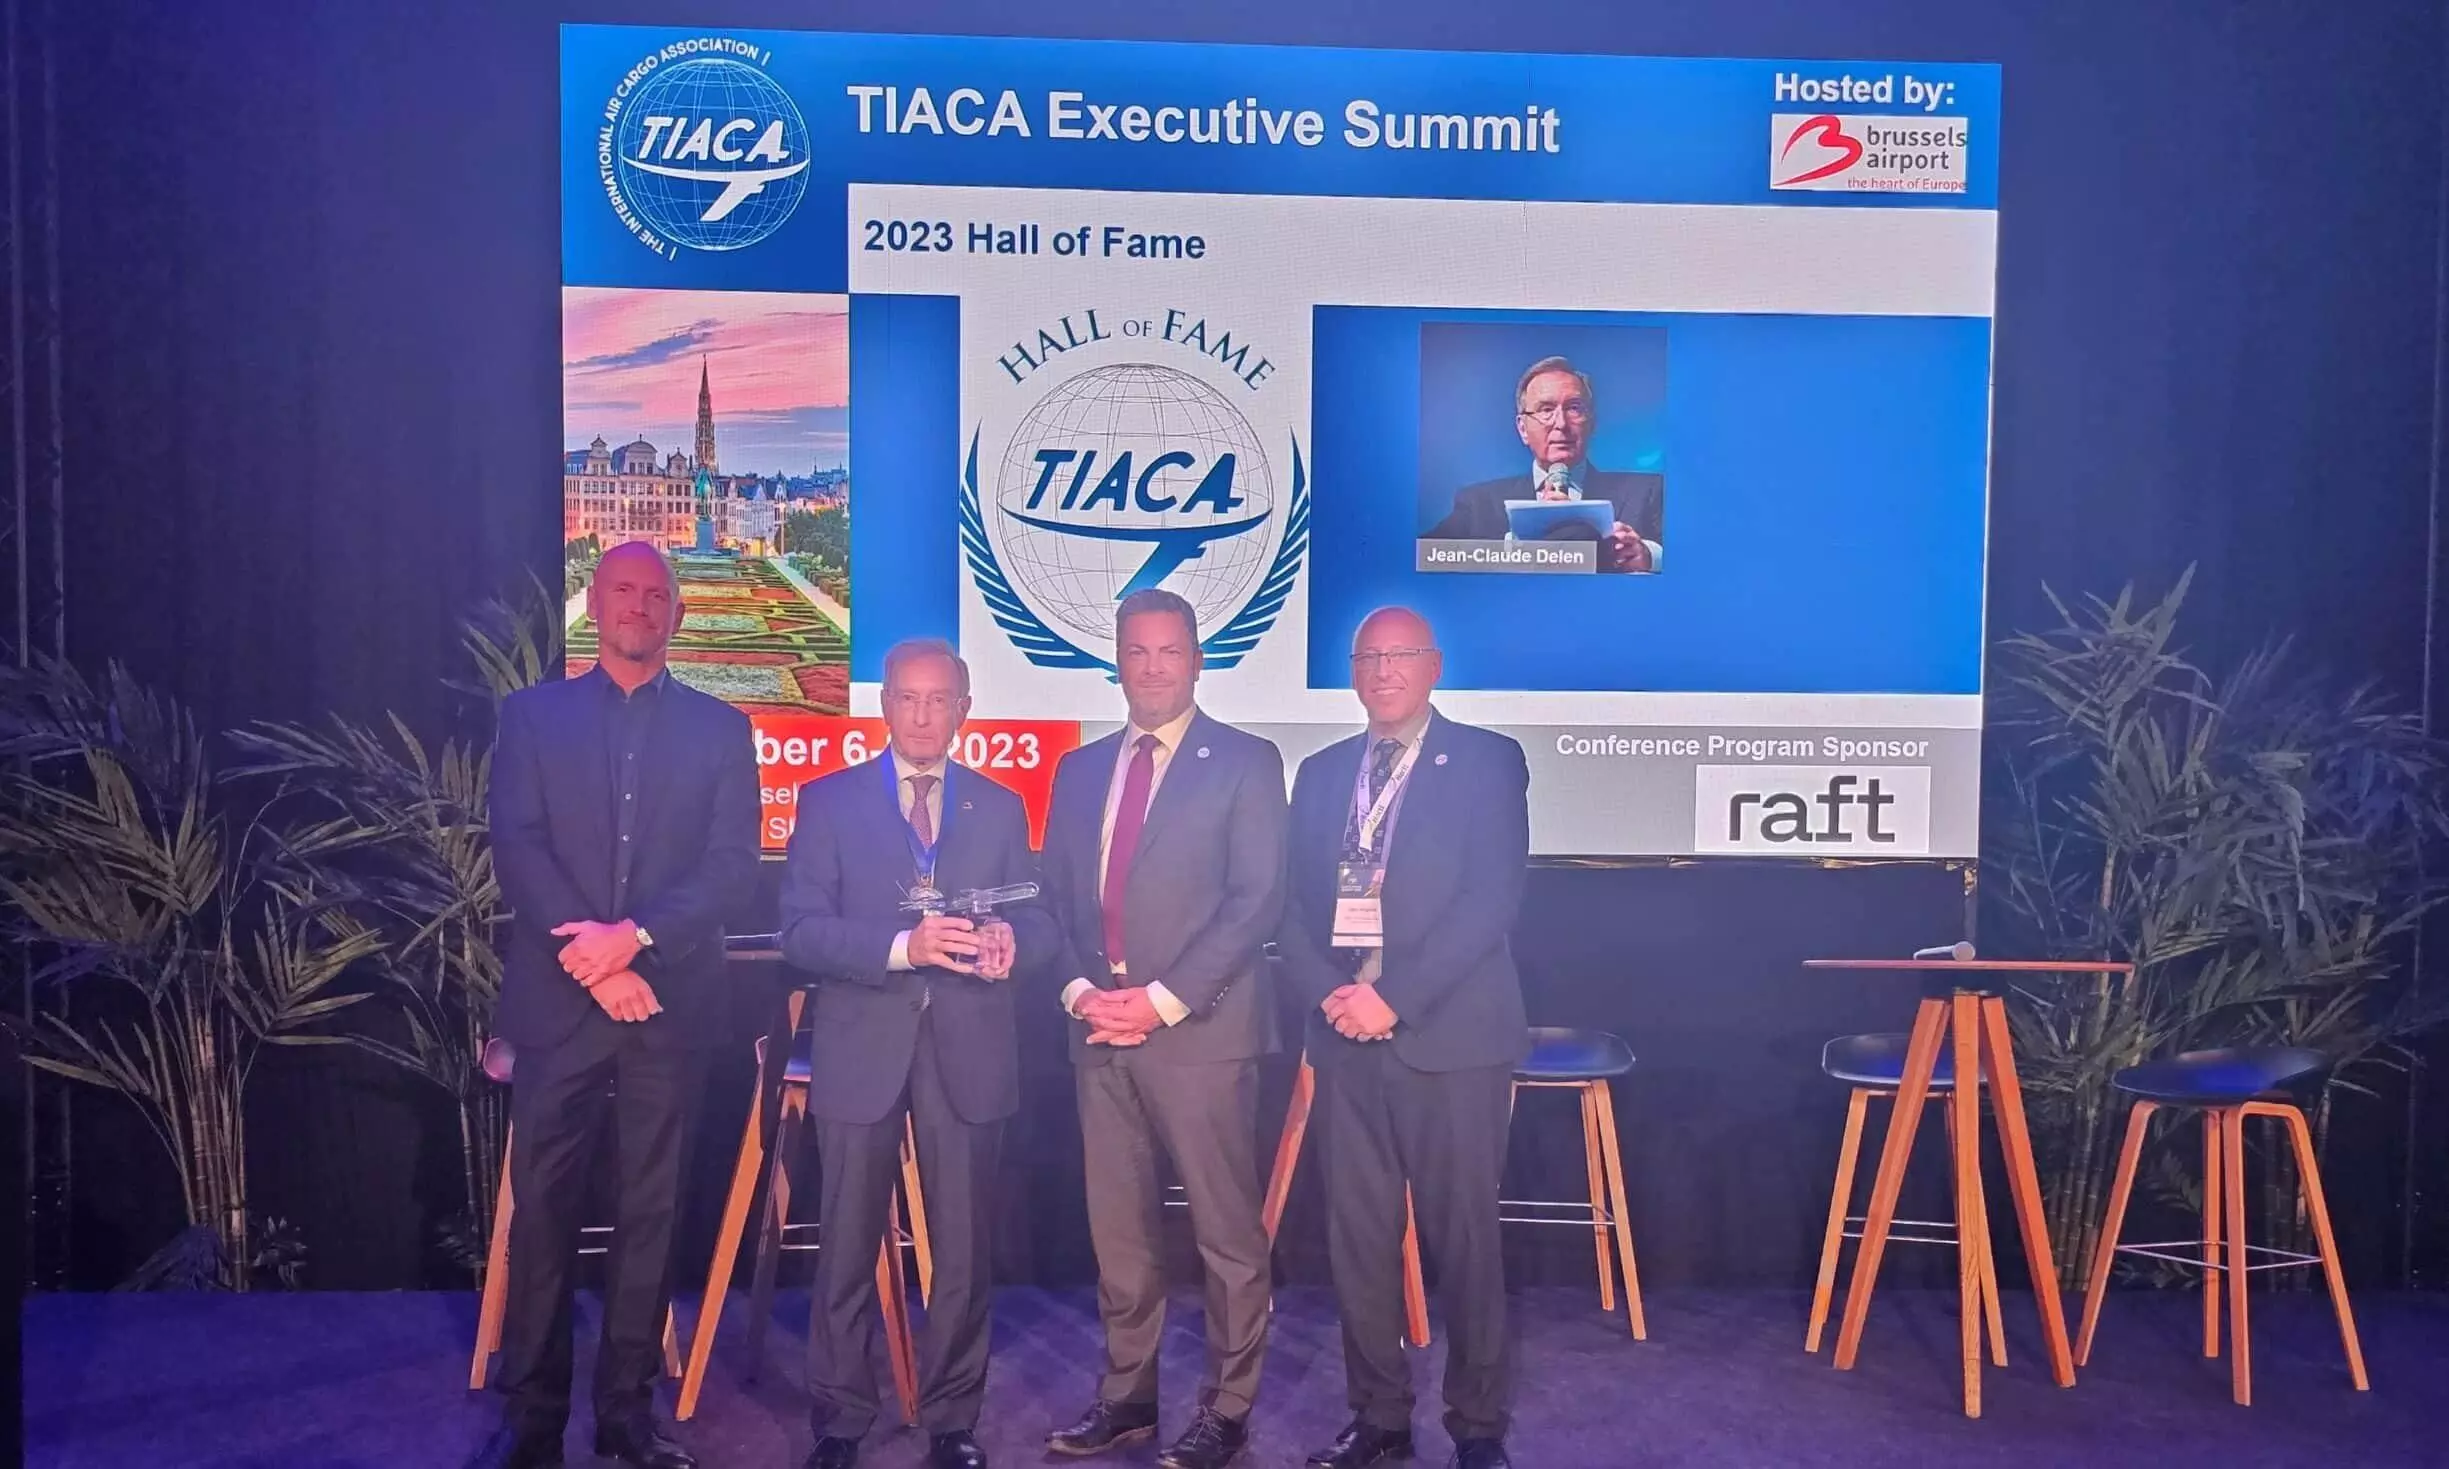 Jean-Claude Delen inducted into TIACA’s Hall of Fame